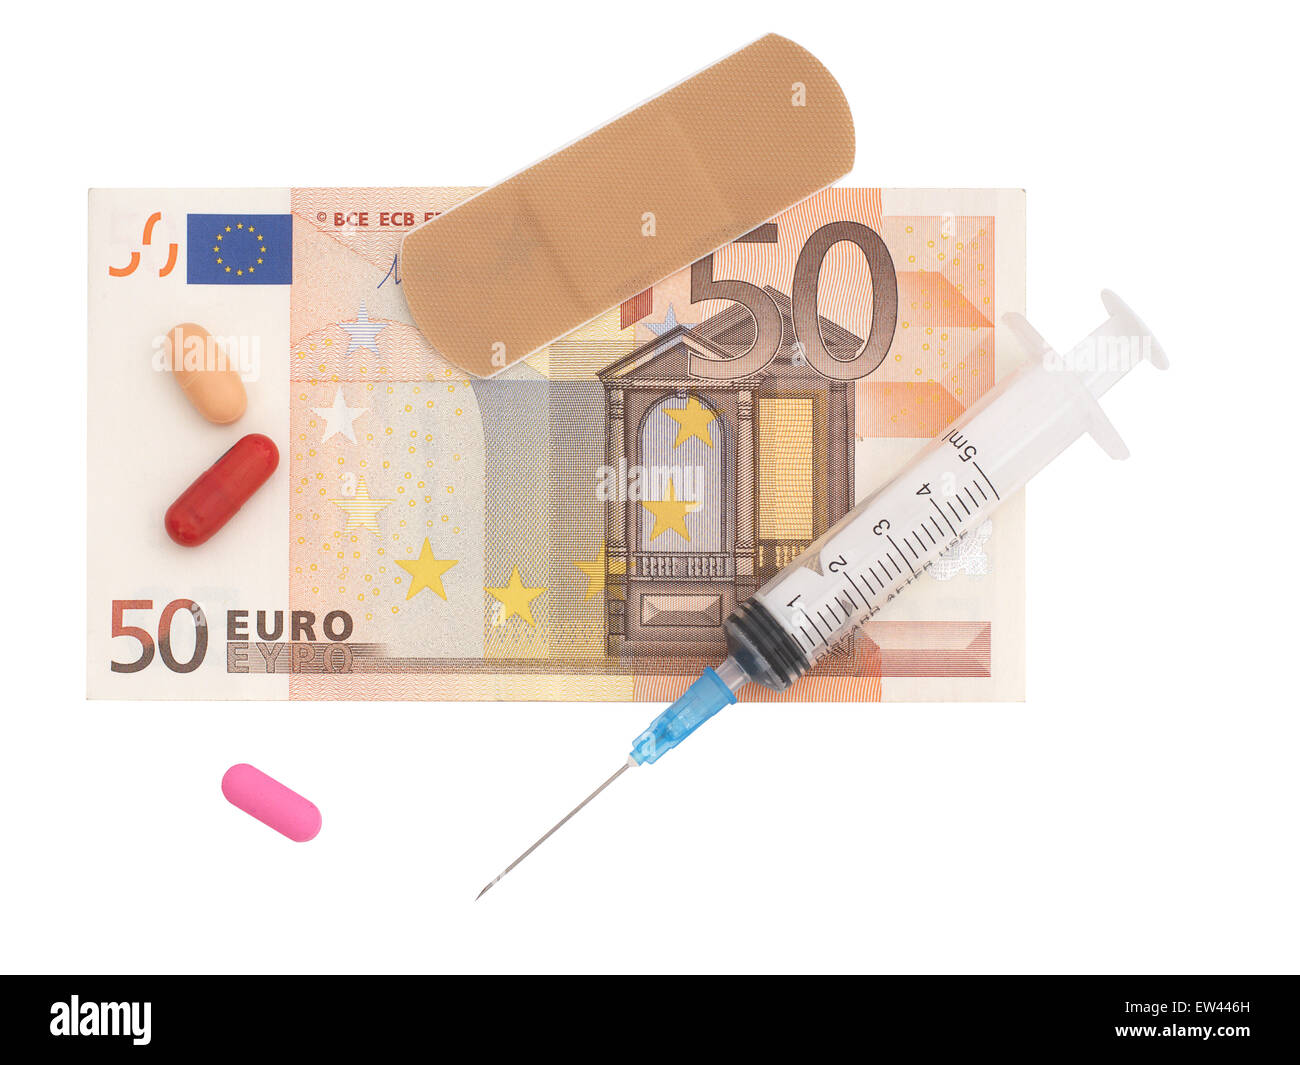 Euro note and medical items. First Aid for the Euro, Eurozone. Concept isolated on white. Stock Photo